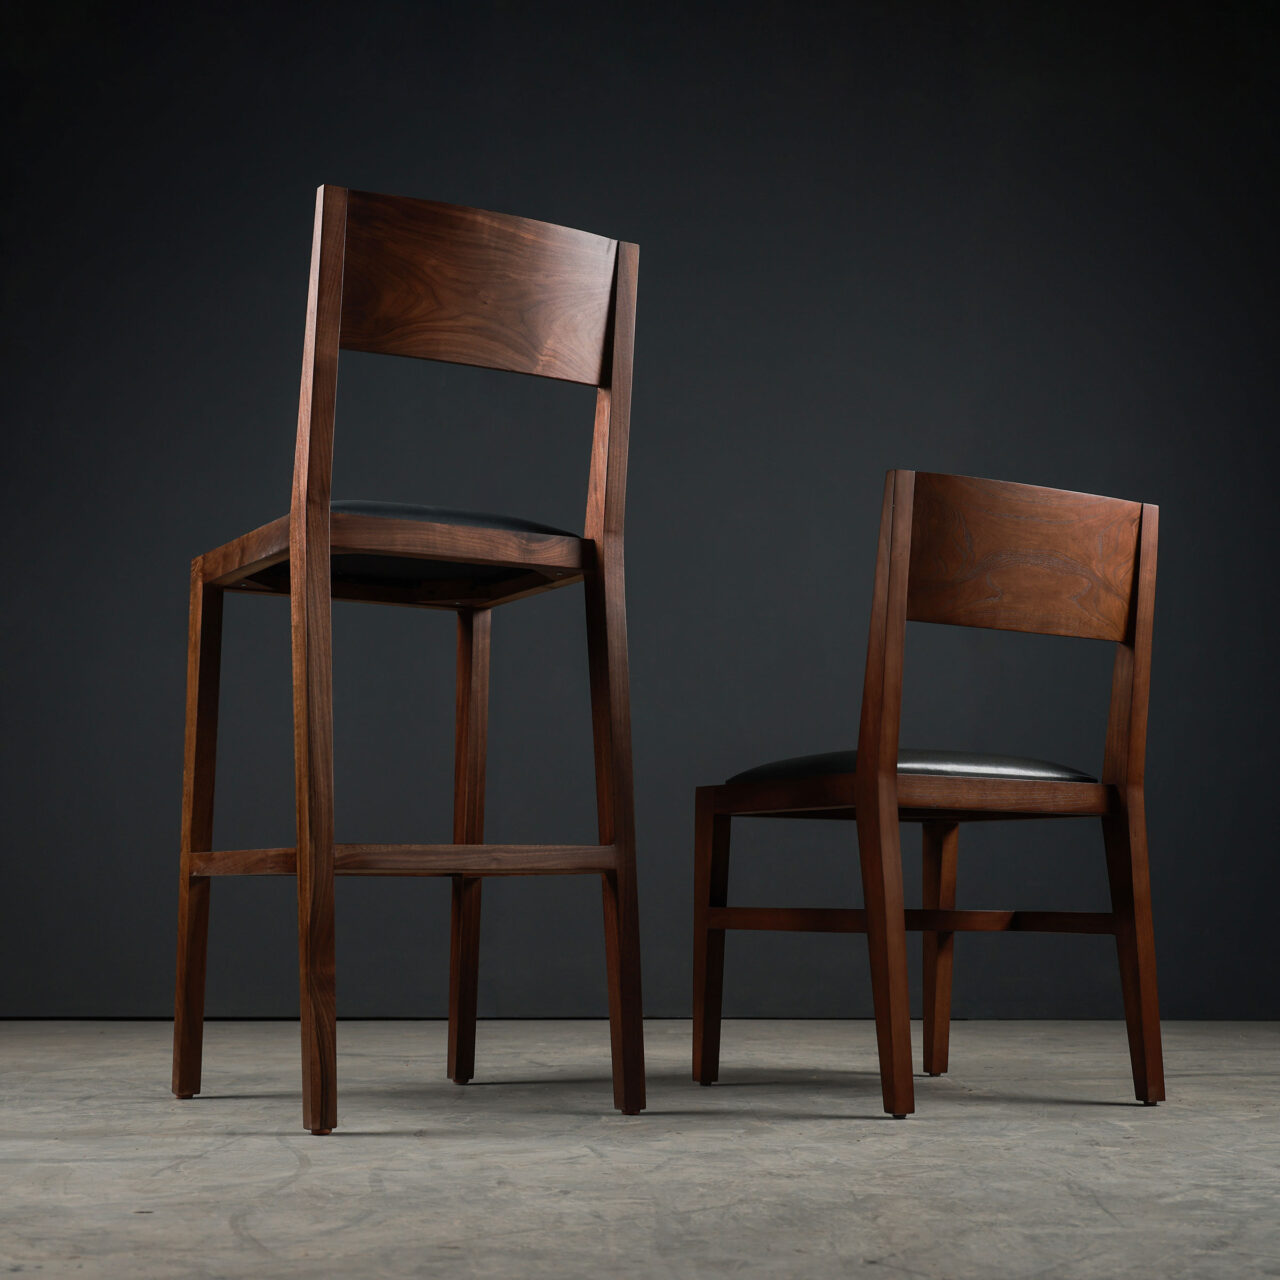 A pair of high-backed luxury solid wood unique dining chairs by SENTIENT Furniture, crafted with rich walnut wood and black leather upholstery, presented in a dramatic studio setting with a black background.